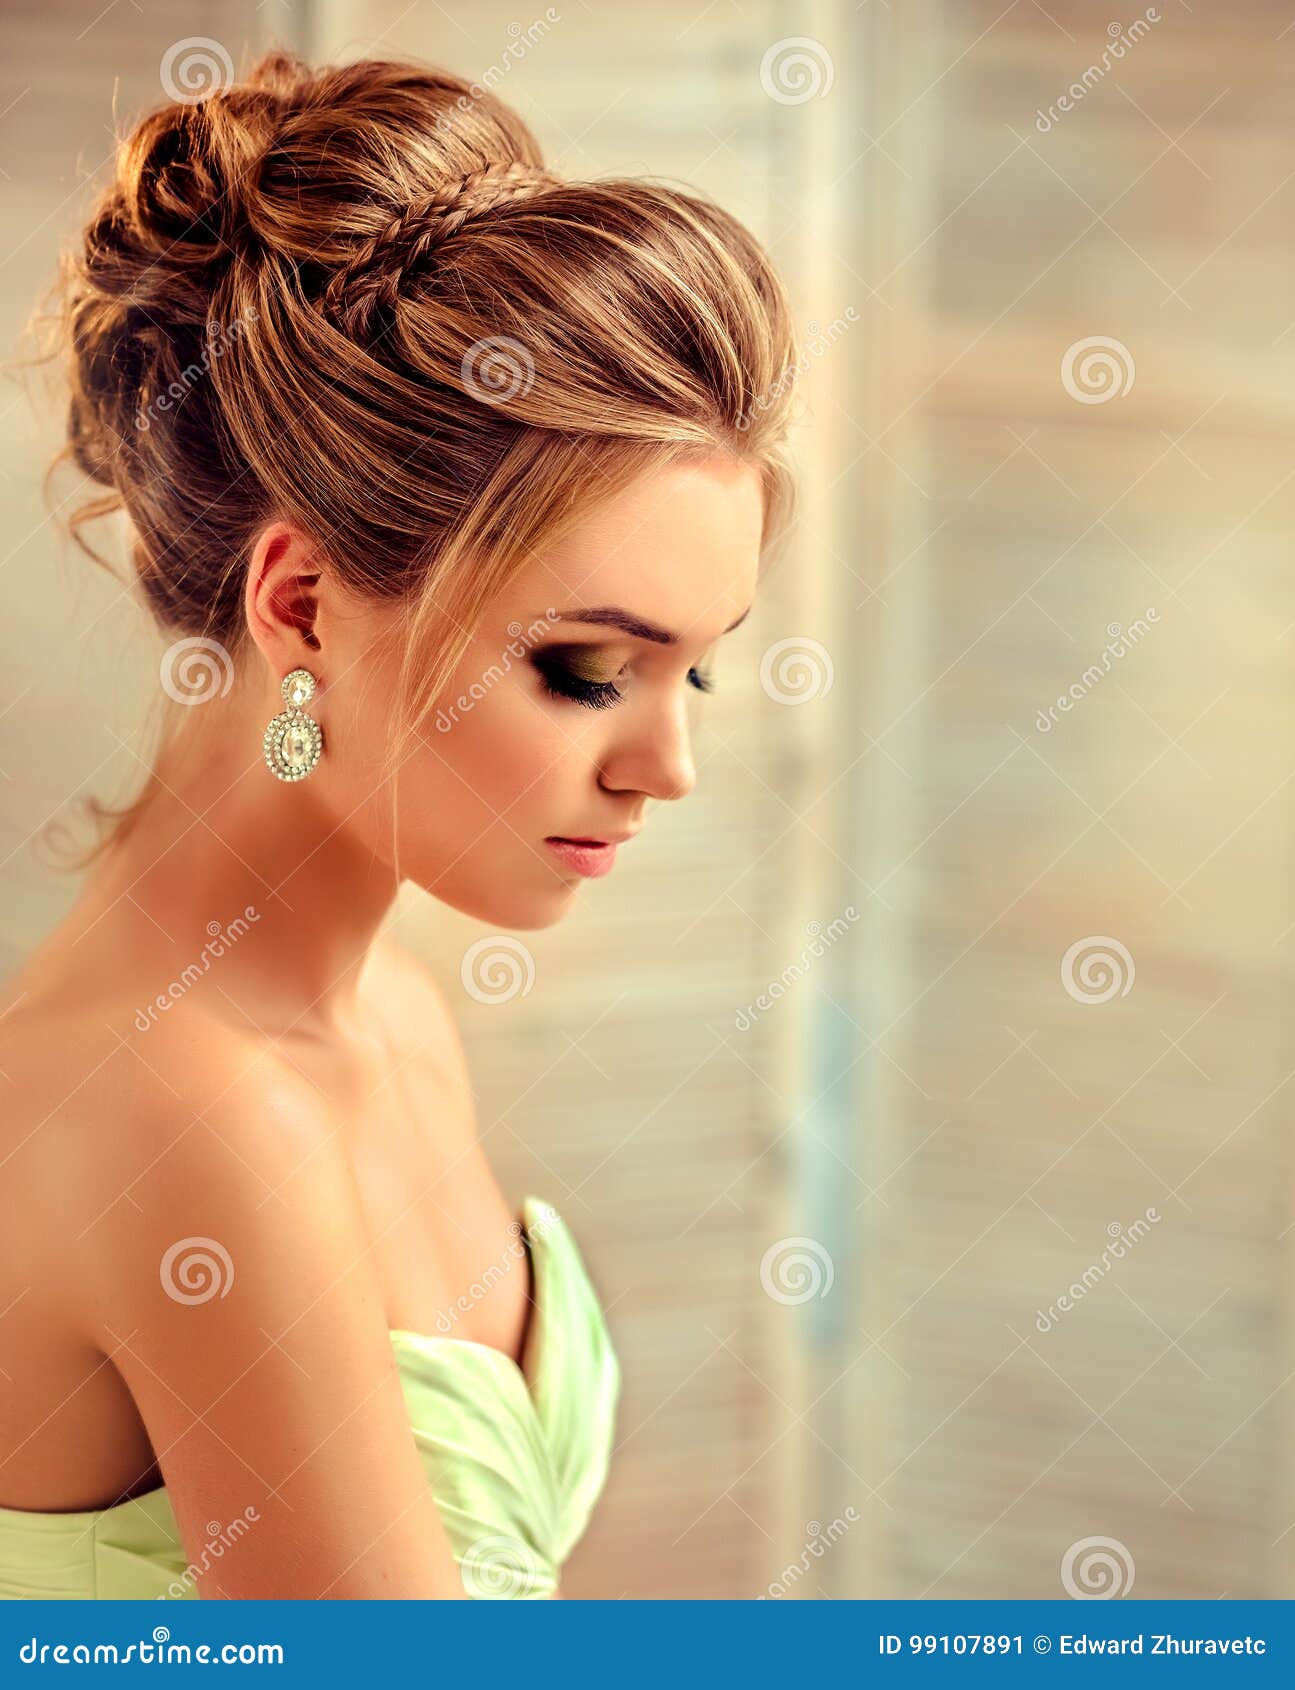 Beautiful young woman in gorgeous black evening dress with perfect makeup  and hair style Stock Photo by ©cherry_daria 130759974